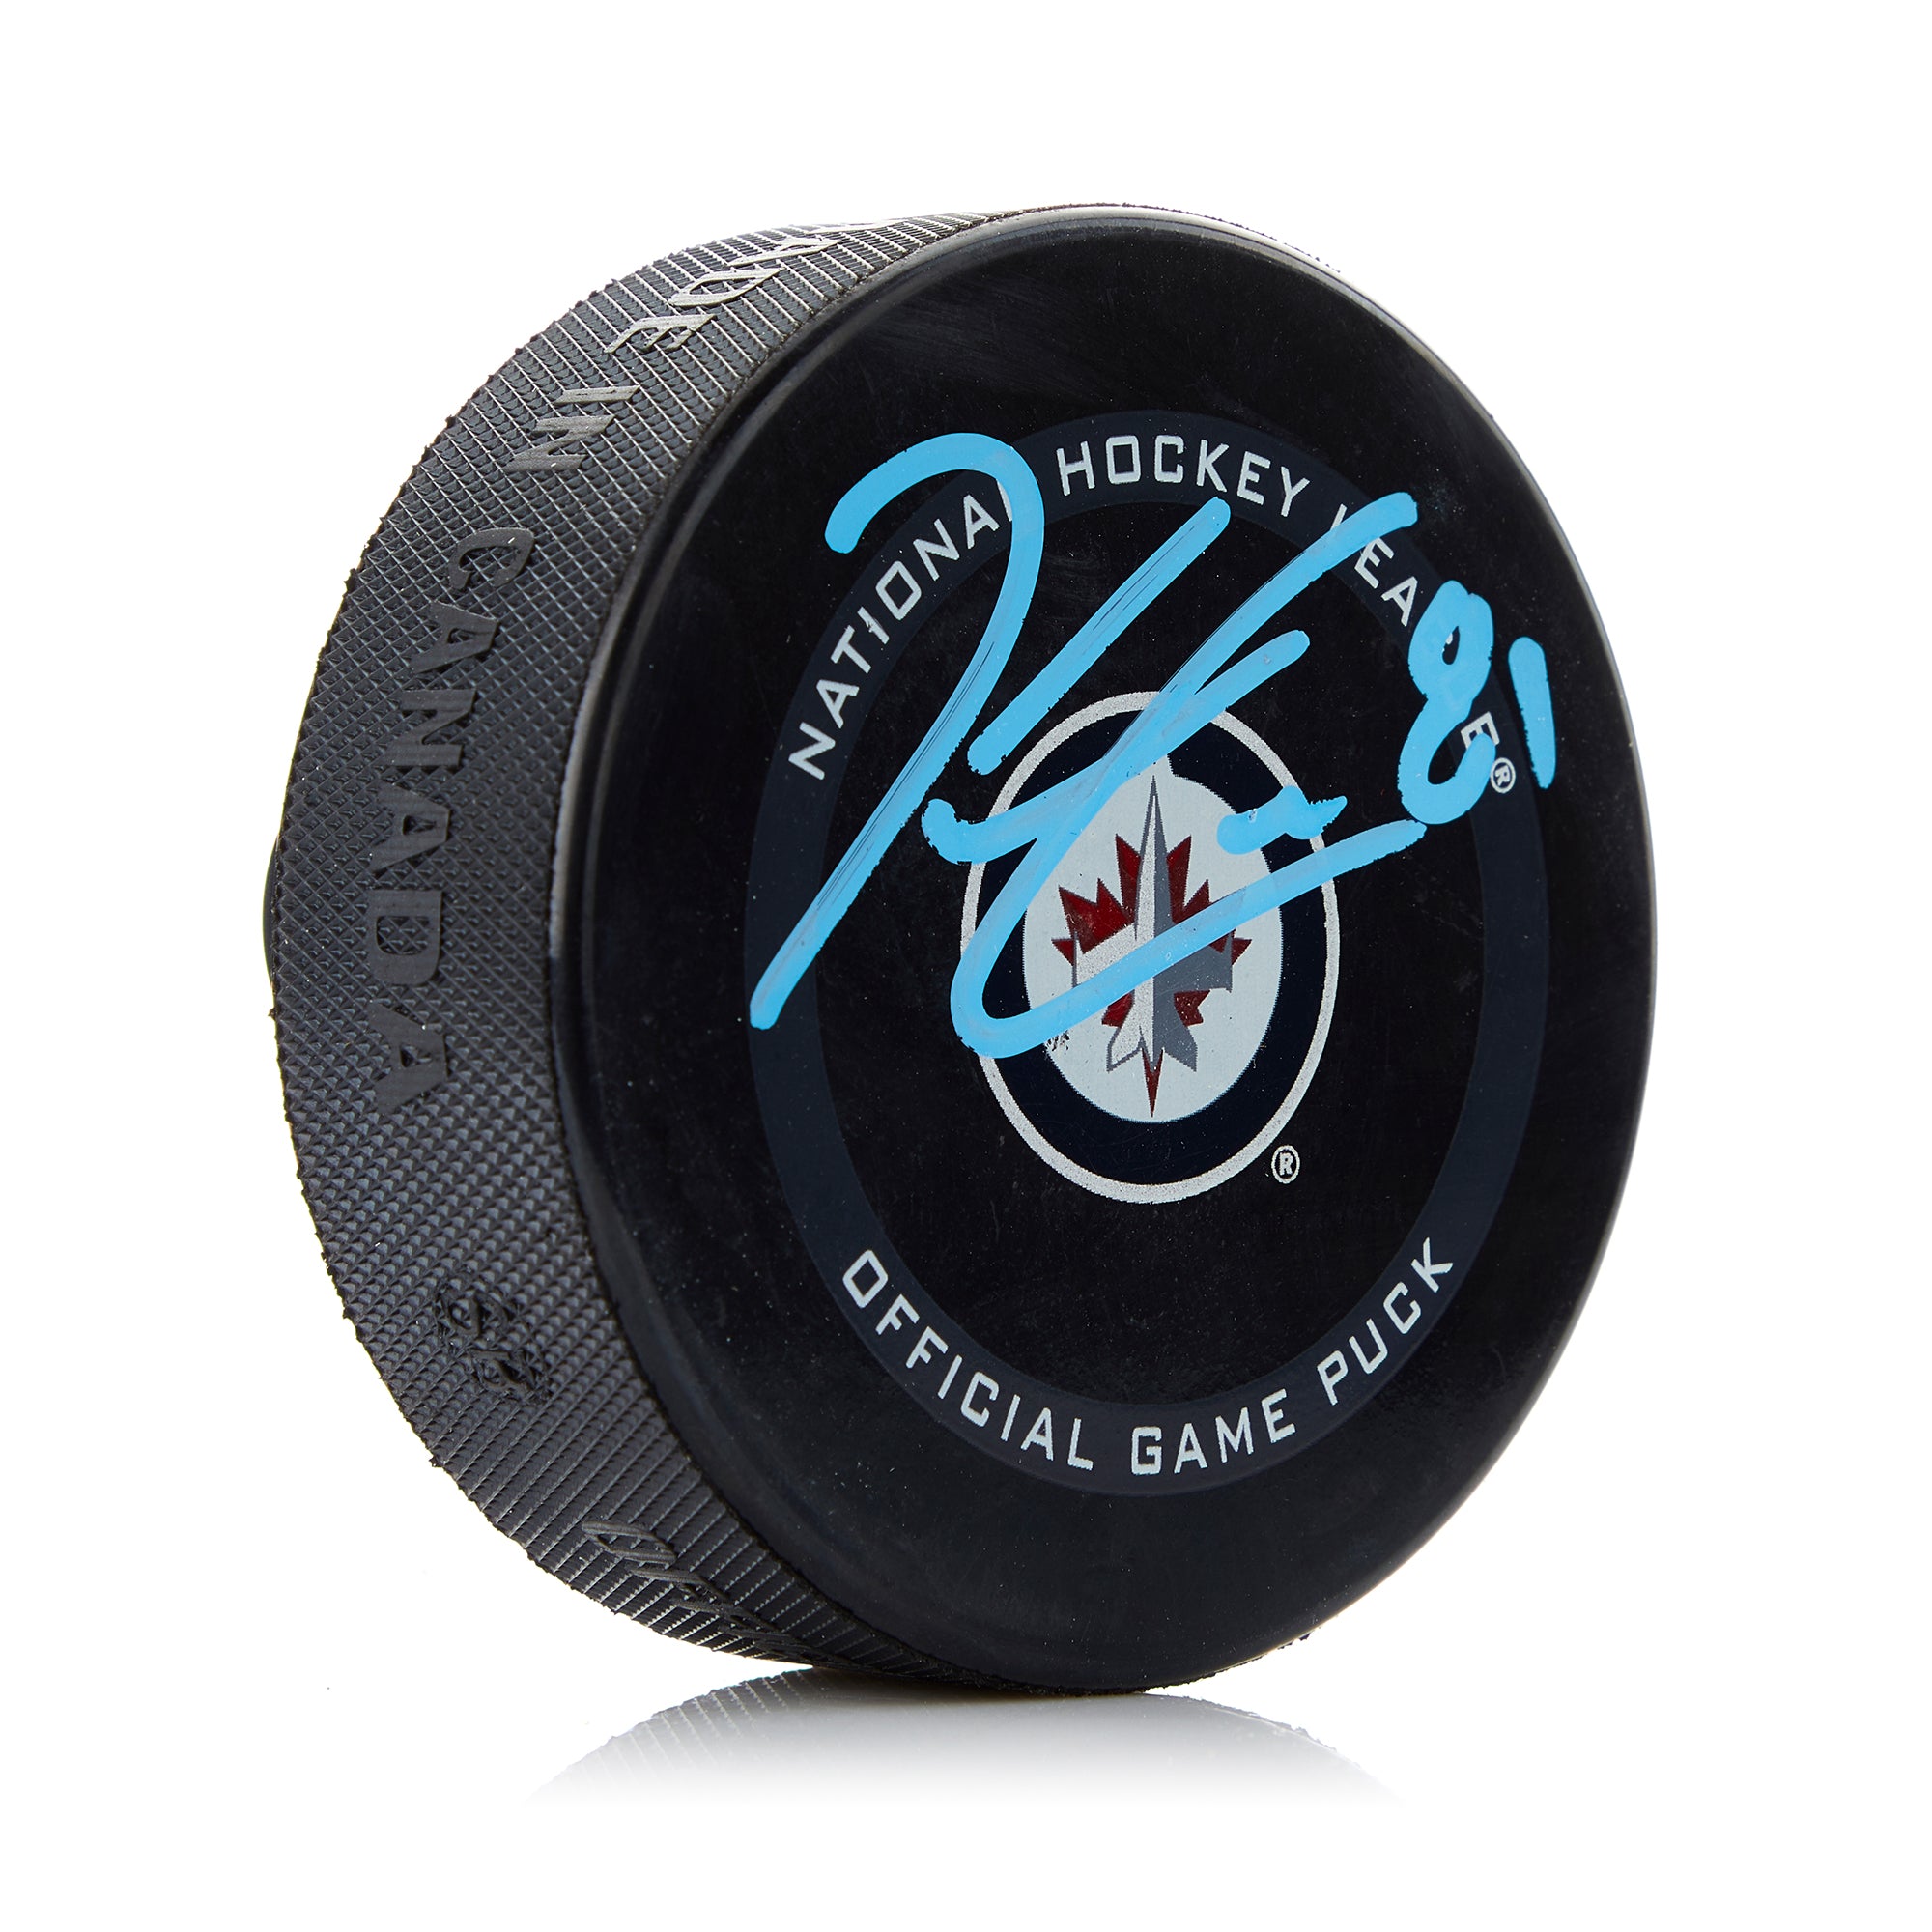 Kyle Connor Winnipeg Jets Signed Official Game Puck